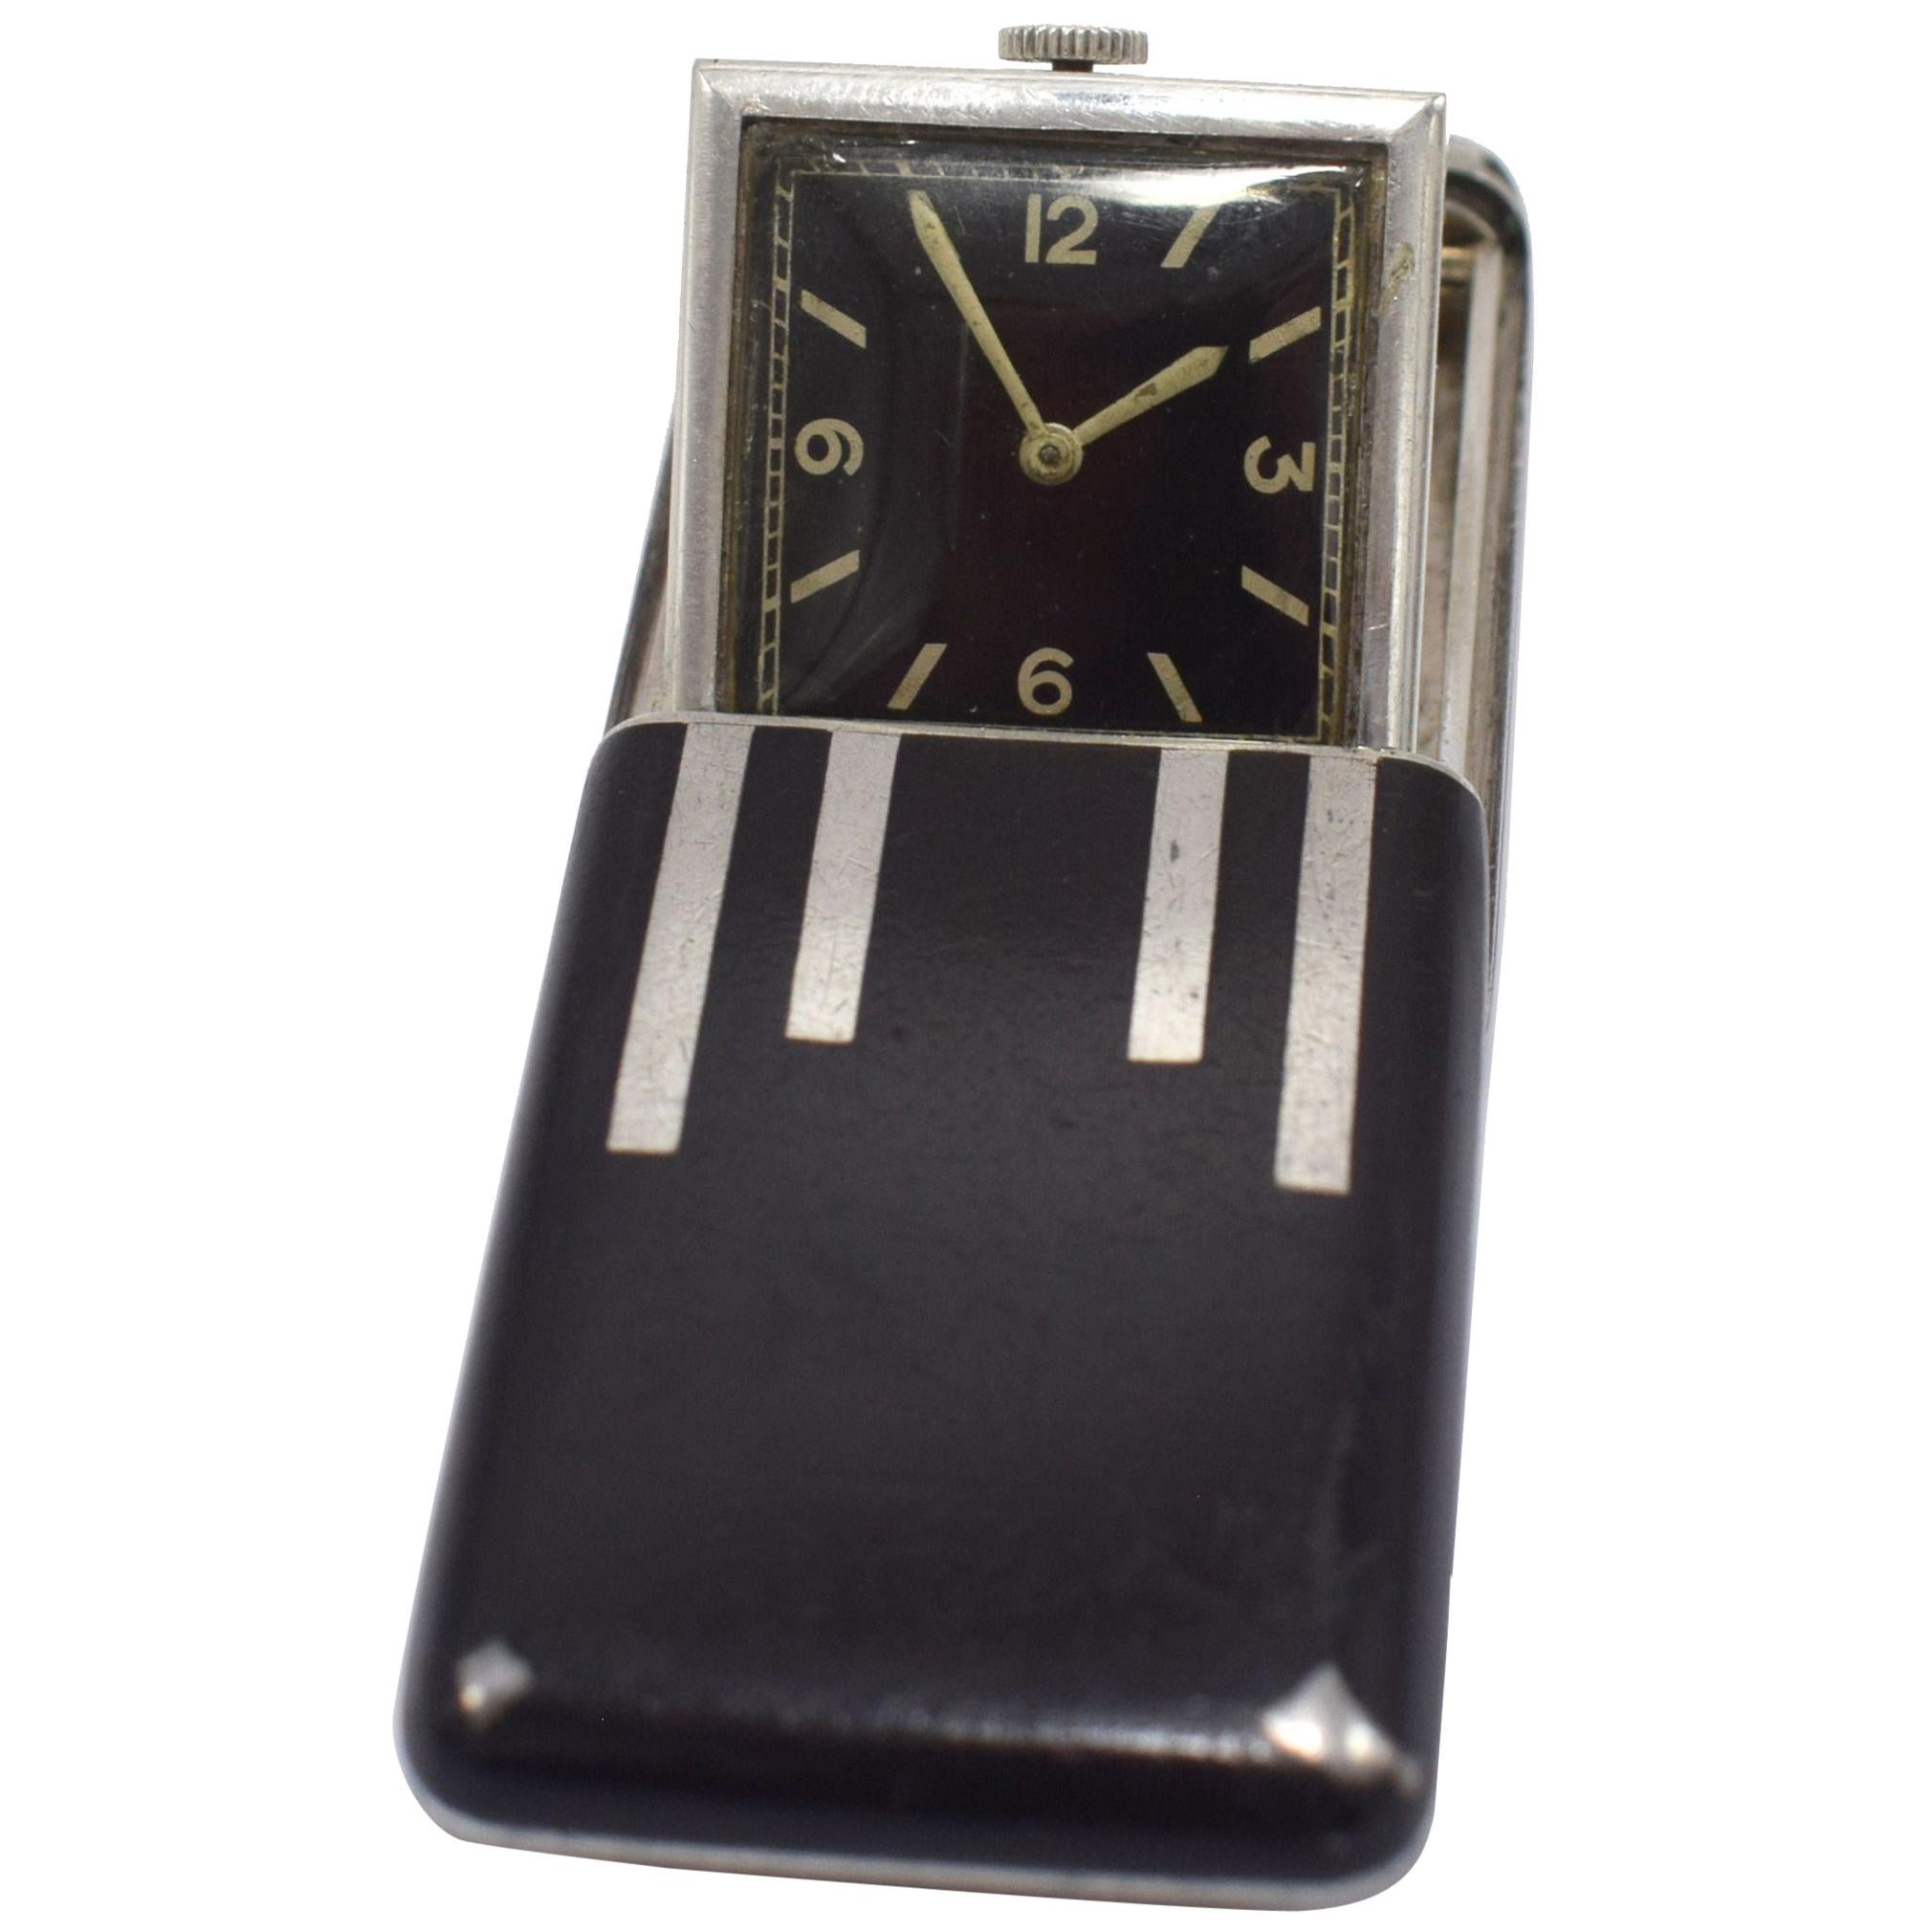 Art Deco Solid Silver Miniature Flip Up Travel Clock by Rotary, circa 1933